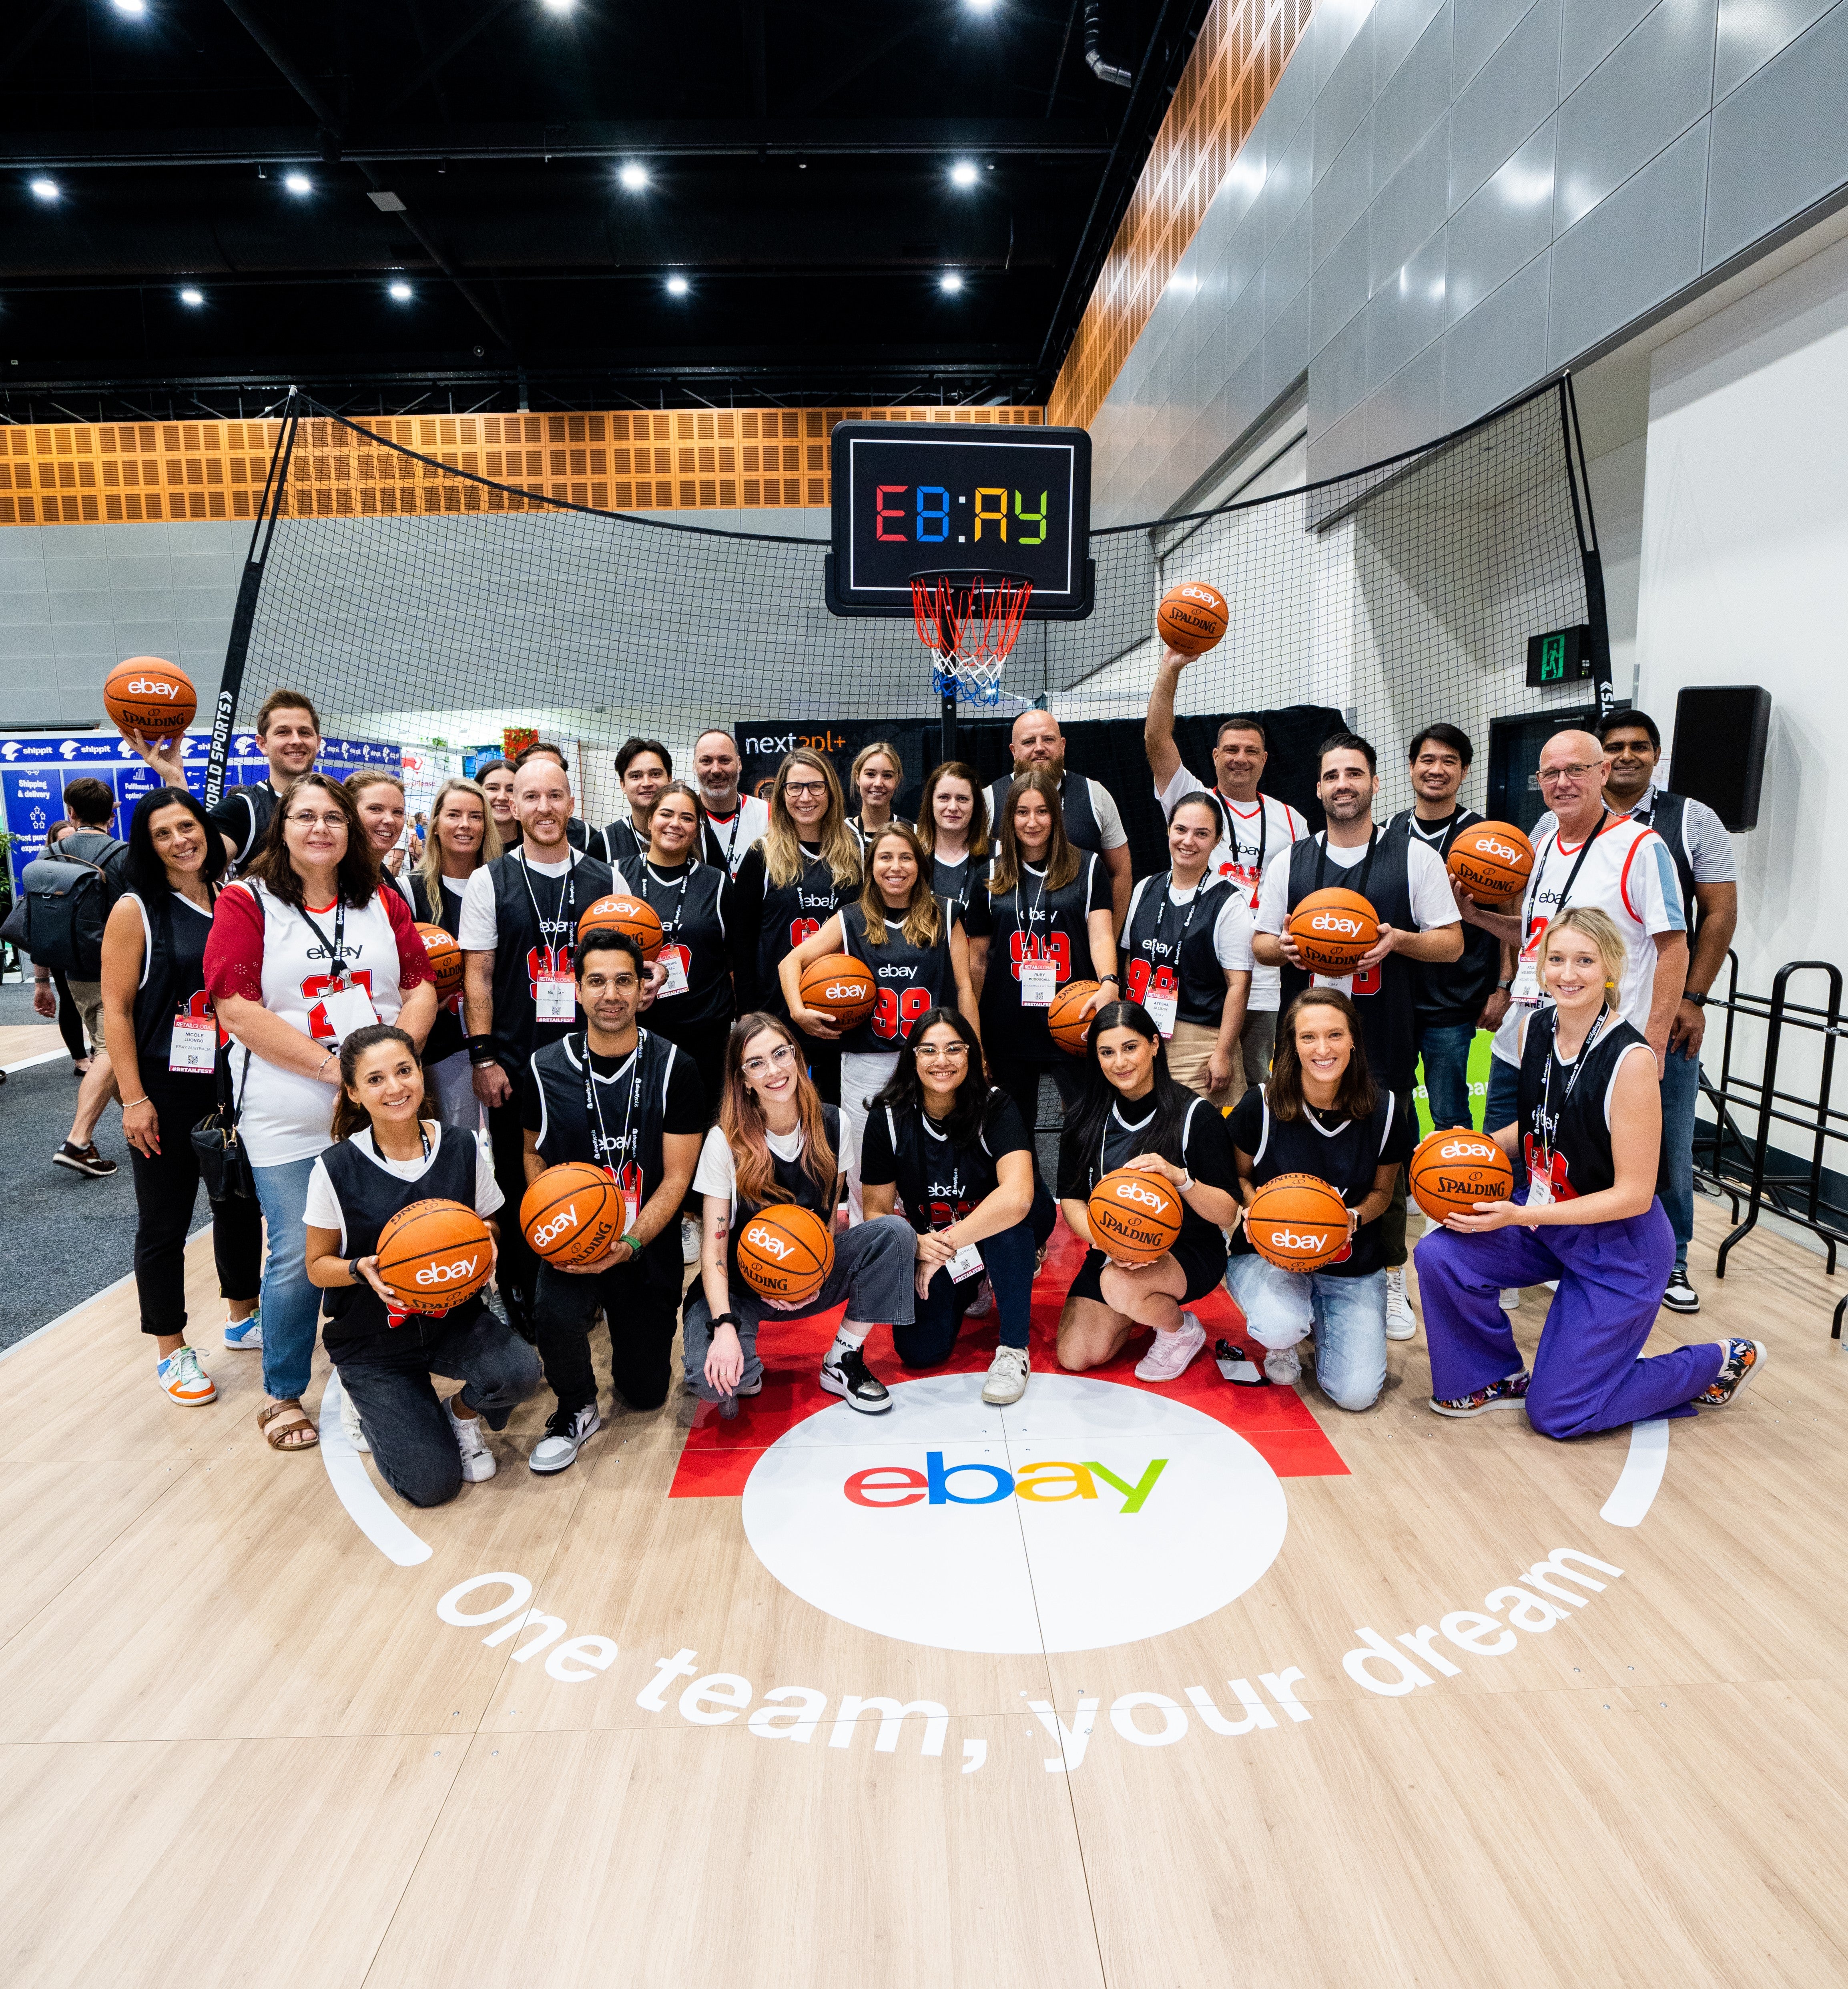 eBay staff and sellers play basketball